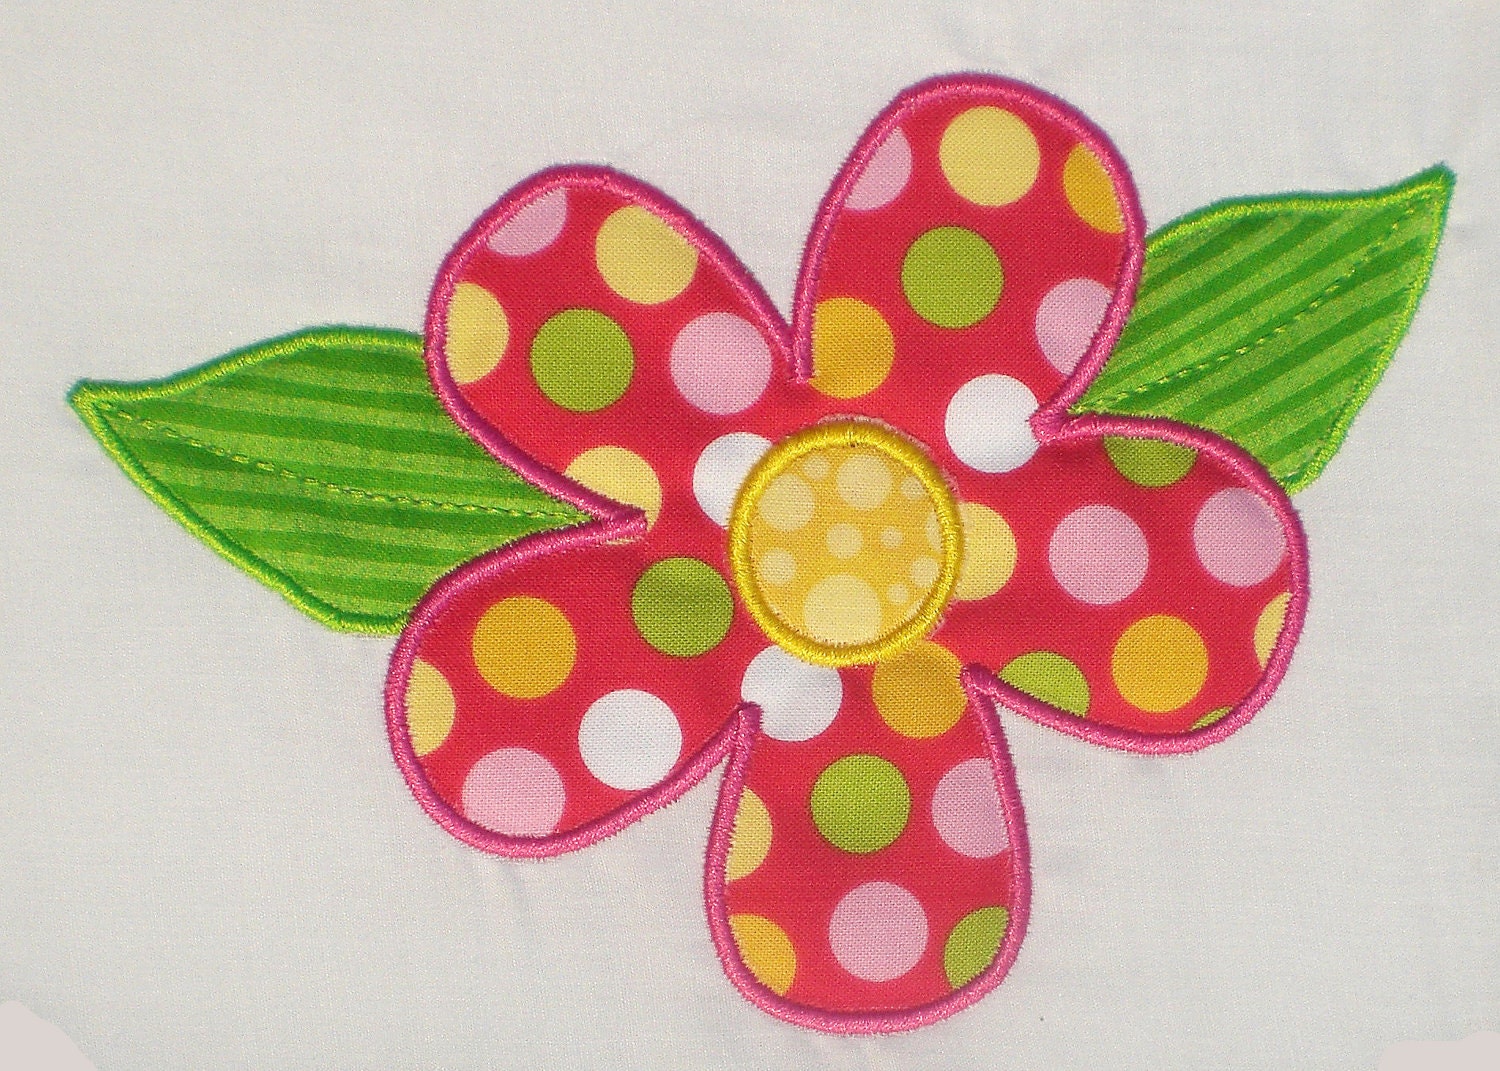 applique embroidery designs free download